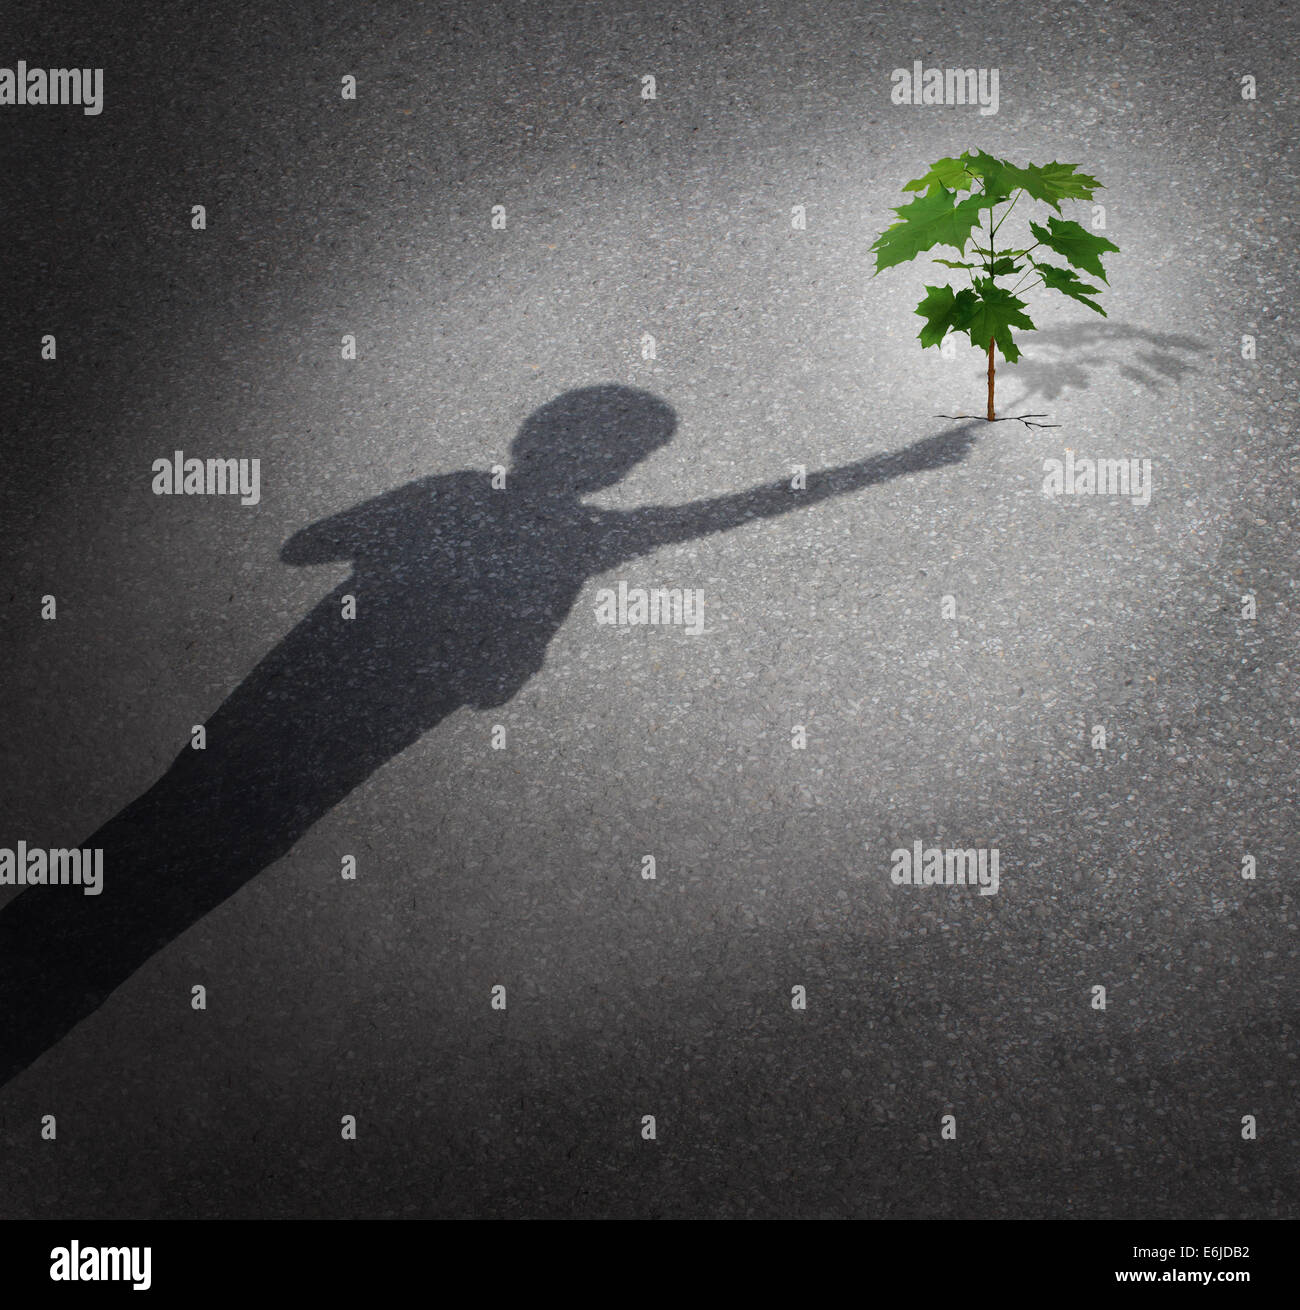 Life and hope as a grow concept with a shadow of a child touching a tree sapling growing through city pavement as a symbol for the future environment protection and the support of the next generation. Stock Photo